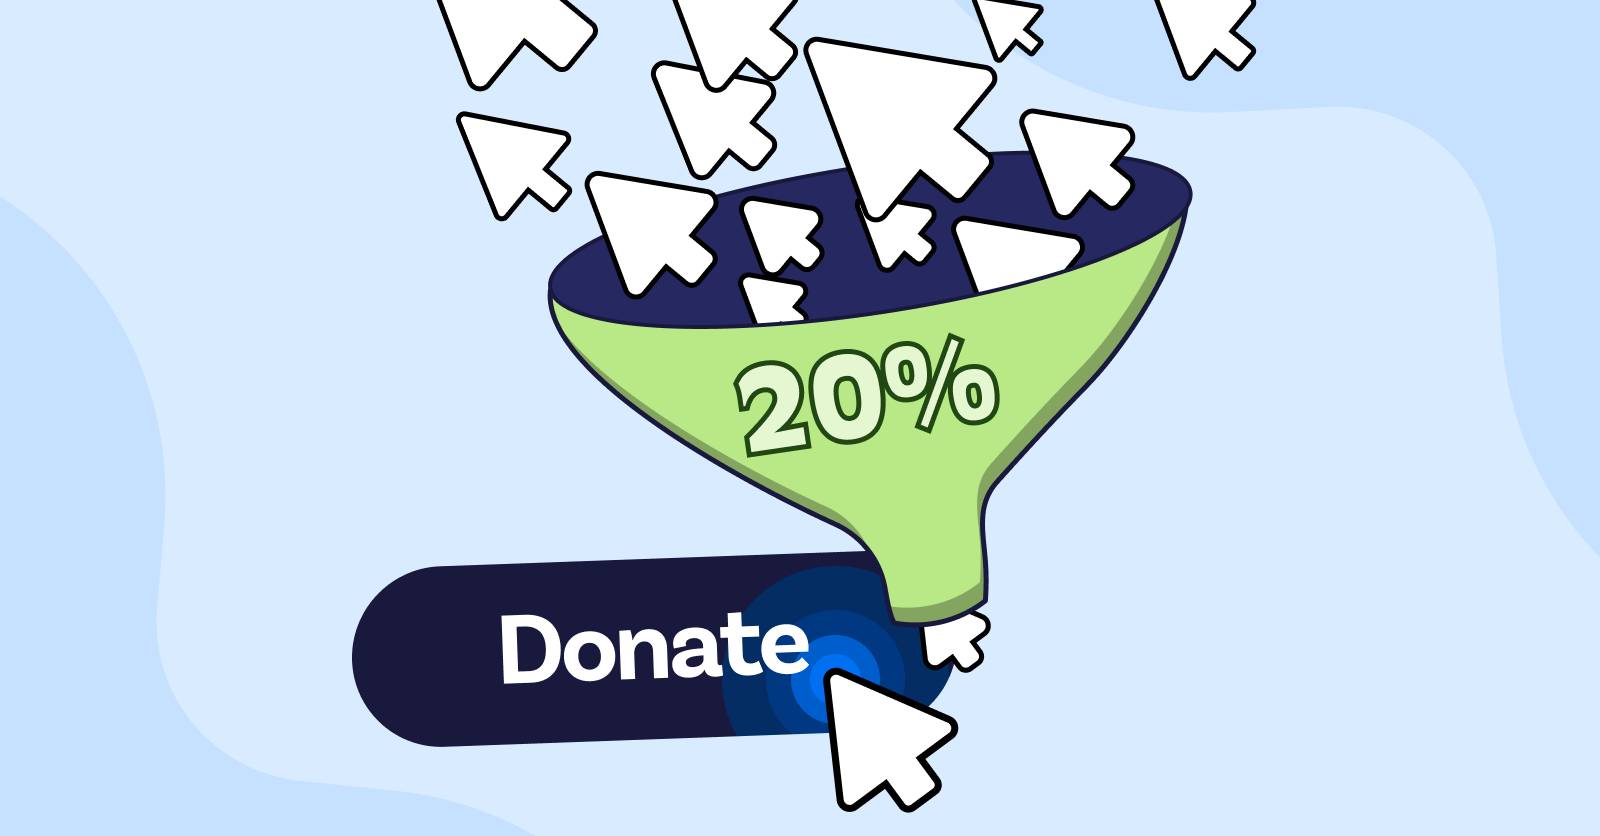 Illustration of a funnel with 20% written on it and a computer mouse clicking on a donate button.